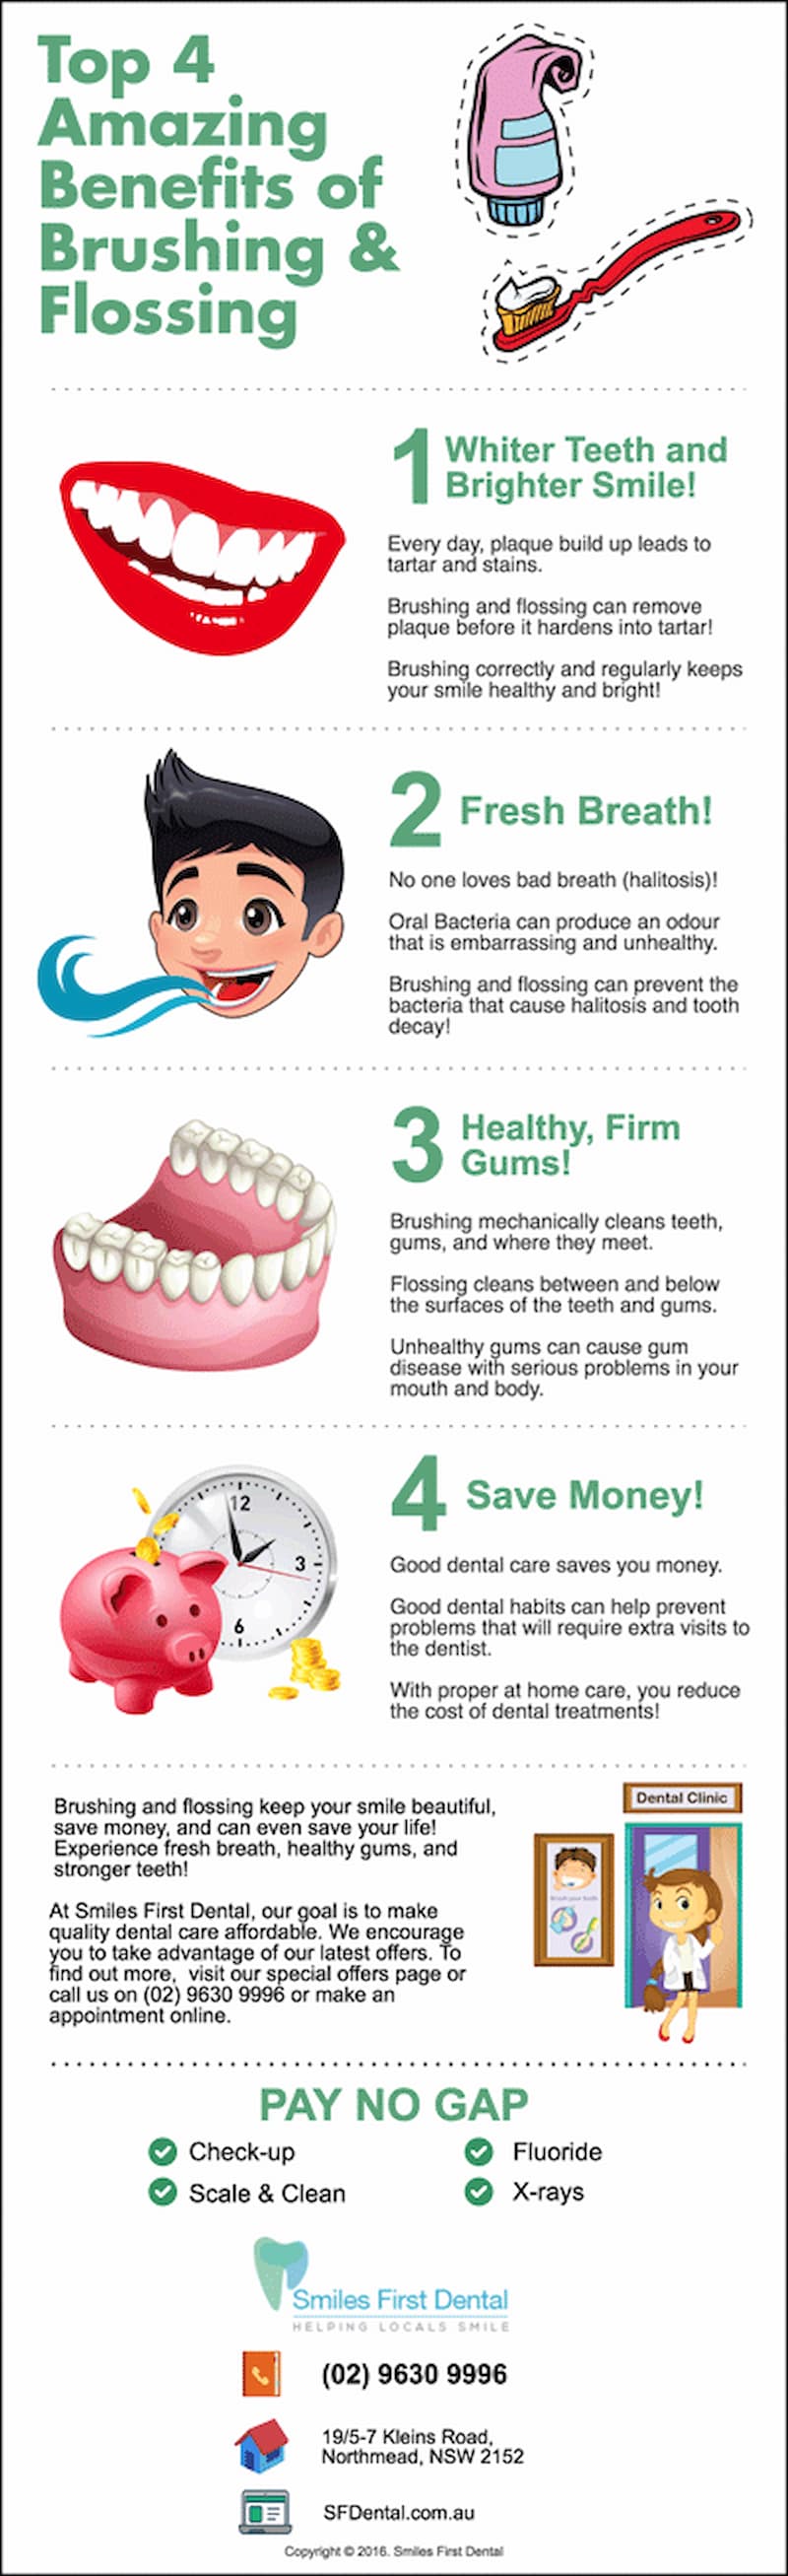 The health benefits of brushing and flossing